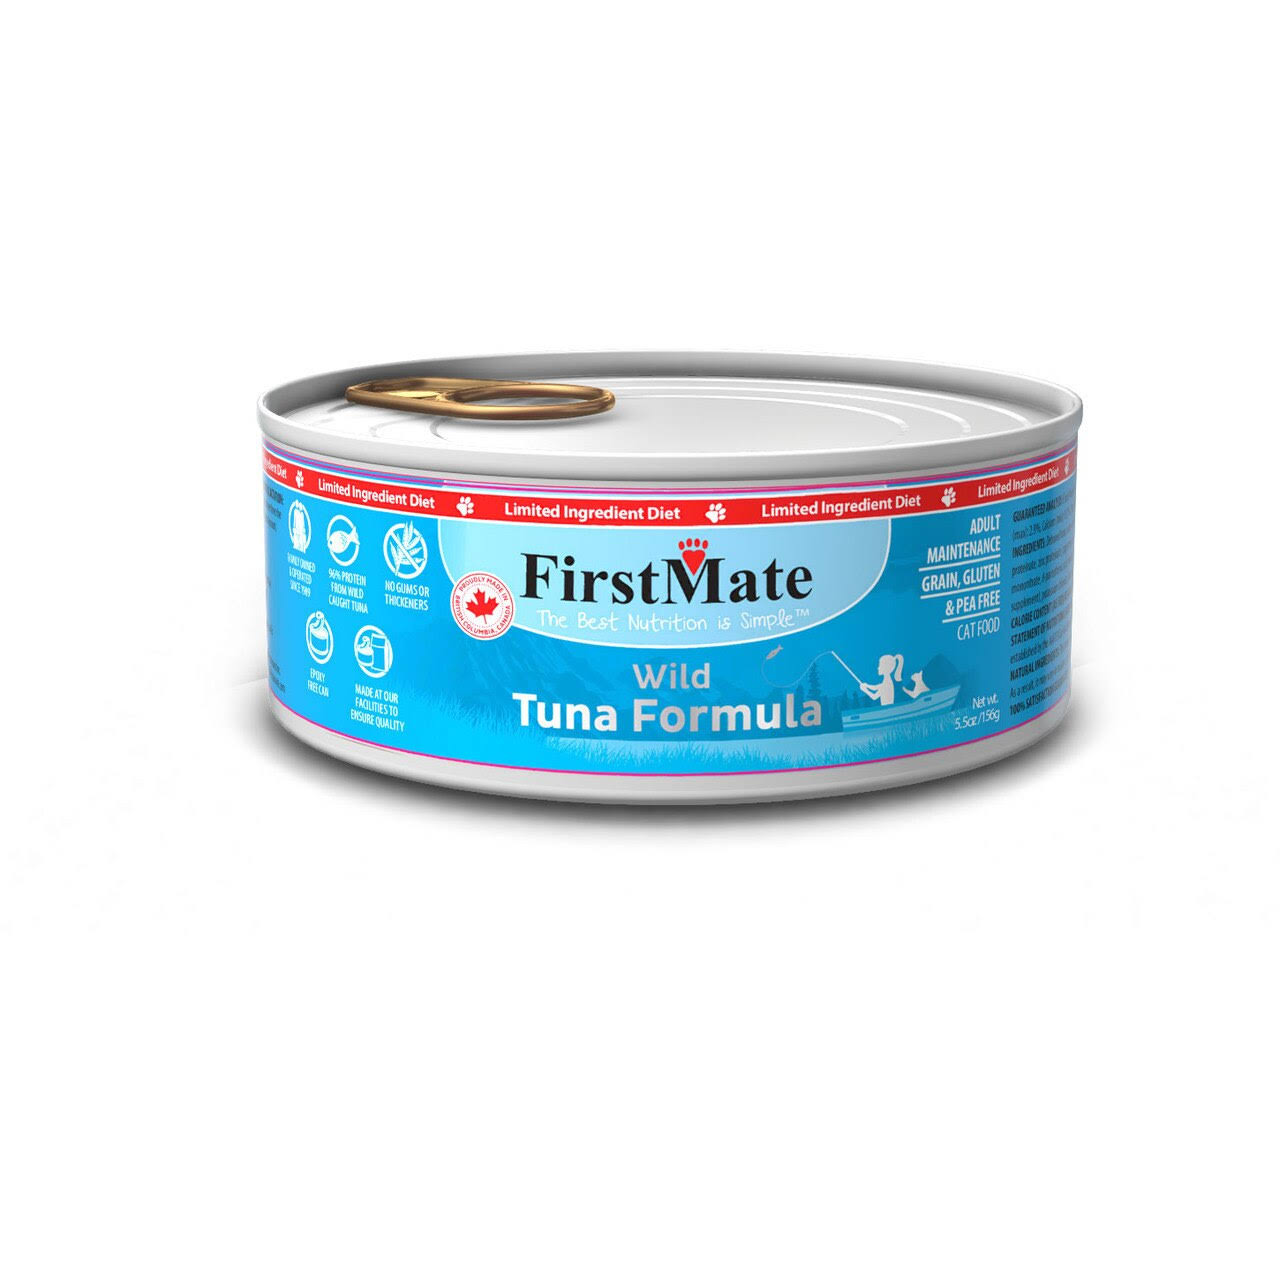 FirstMate Wild Tuna Limited Ingredient Grain-Free Canned Cat Food, 5.5-oz